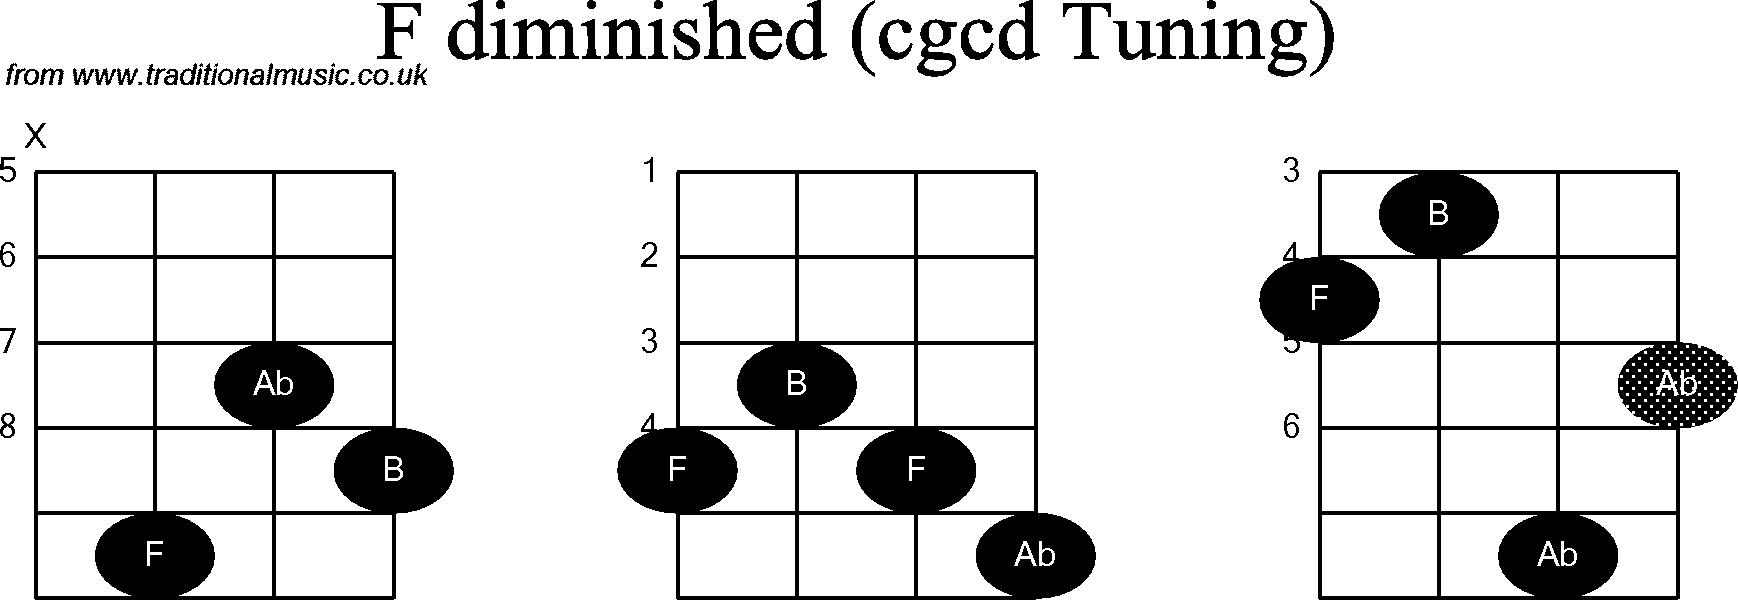 Chord diagrams for Banjo(Double C) F Diminished